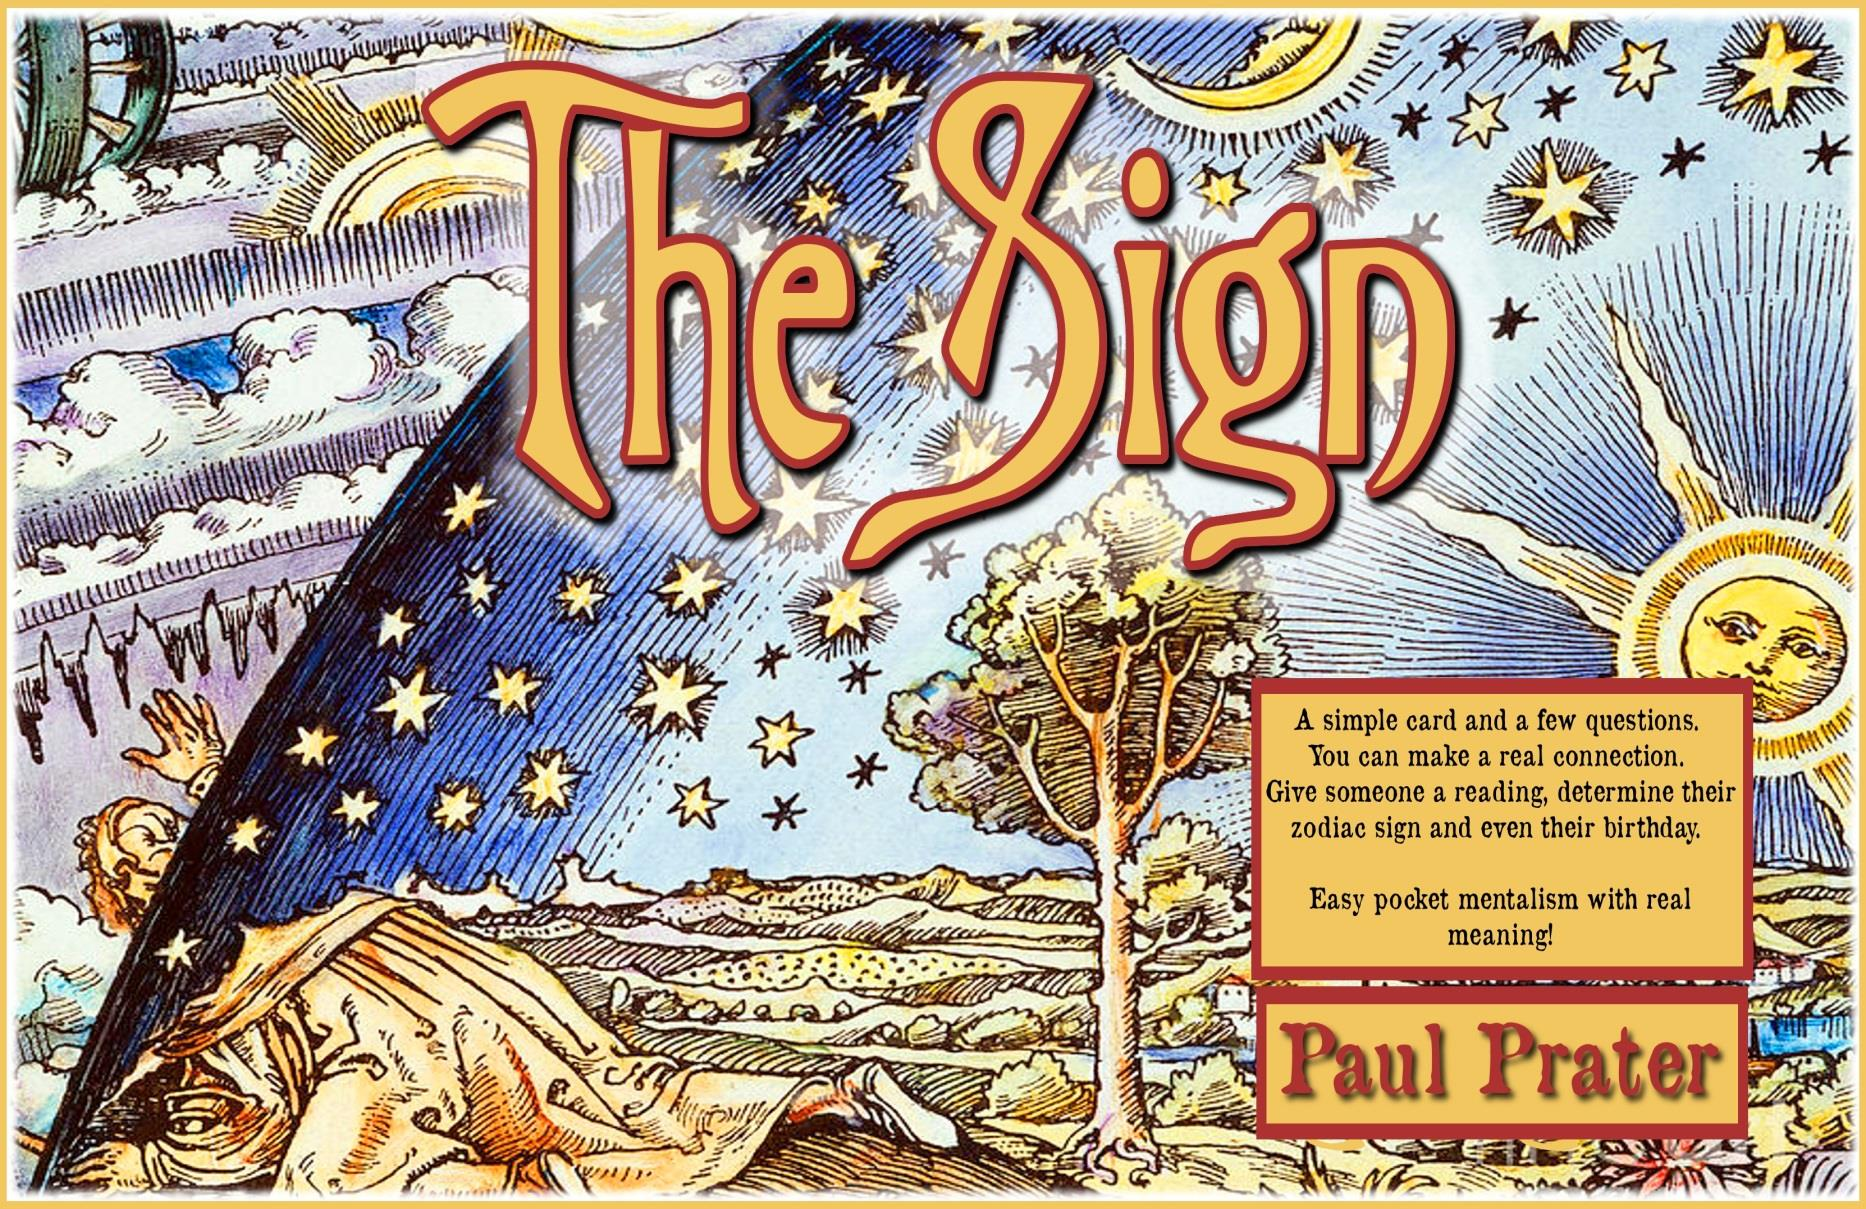 Paul Prater - The Sign